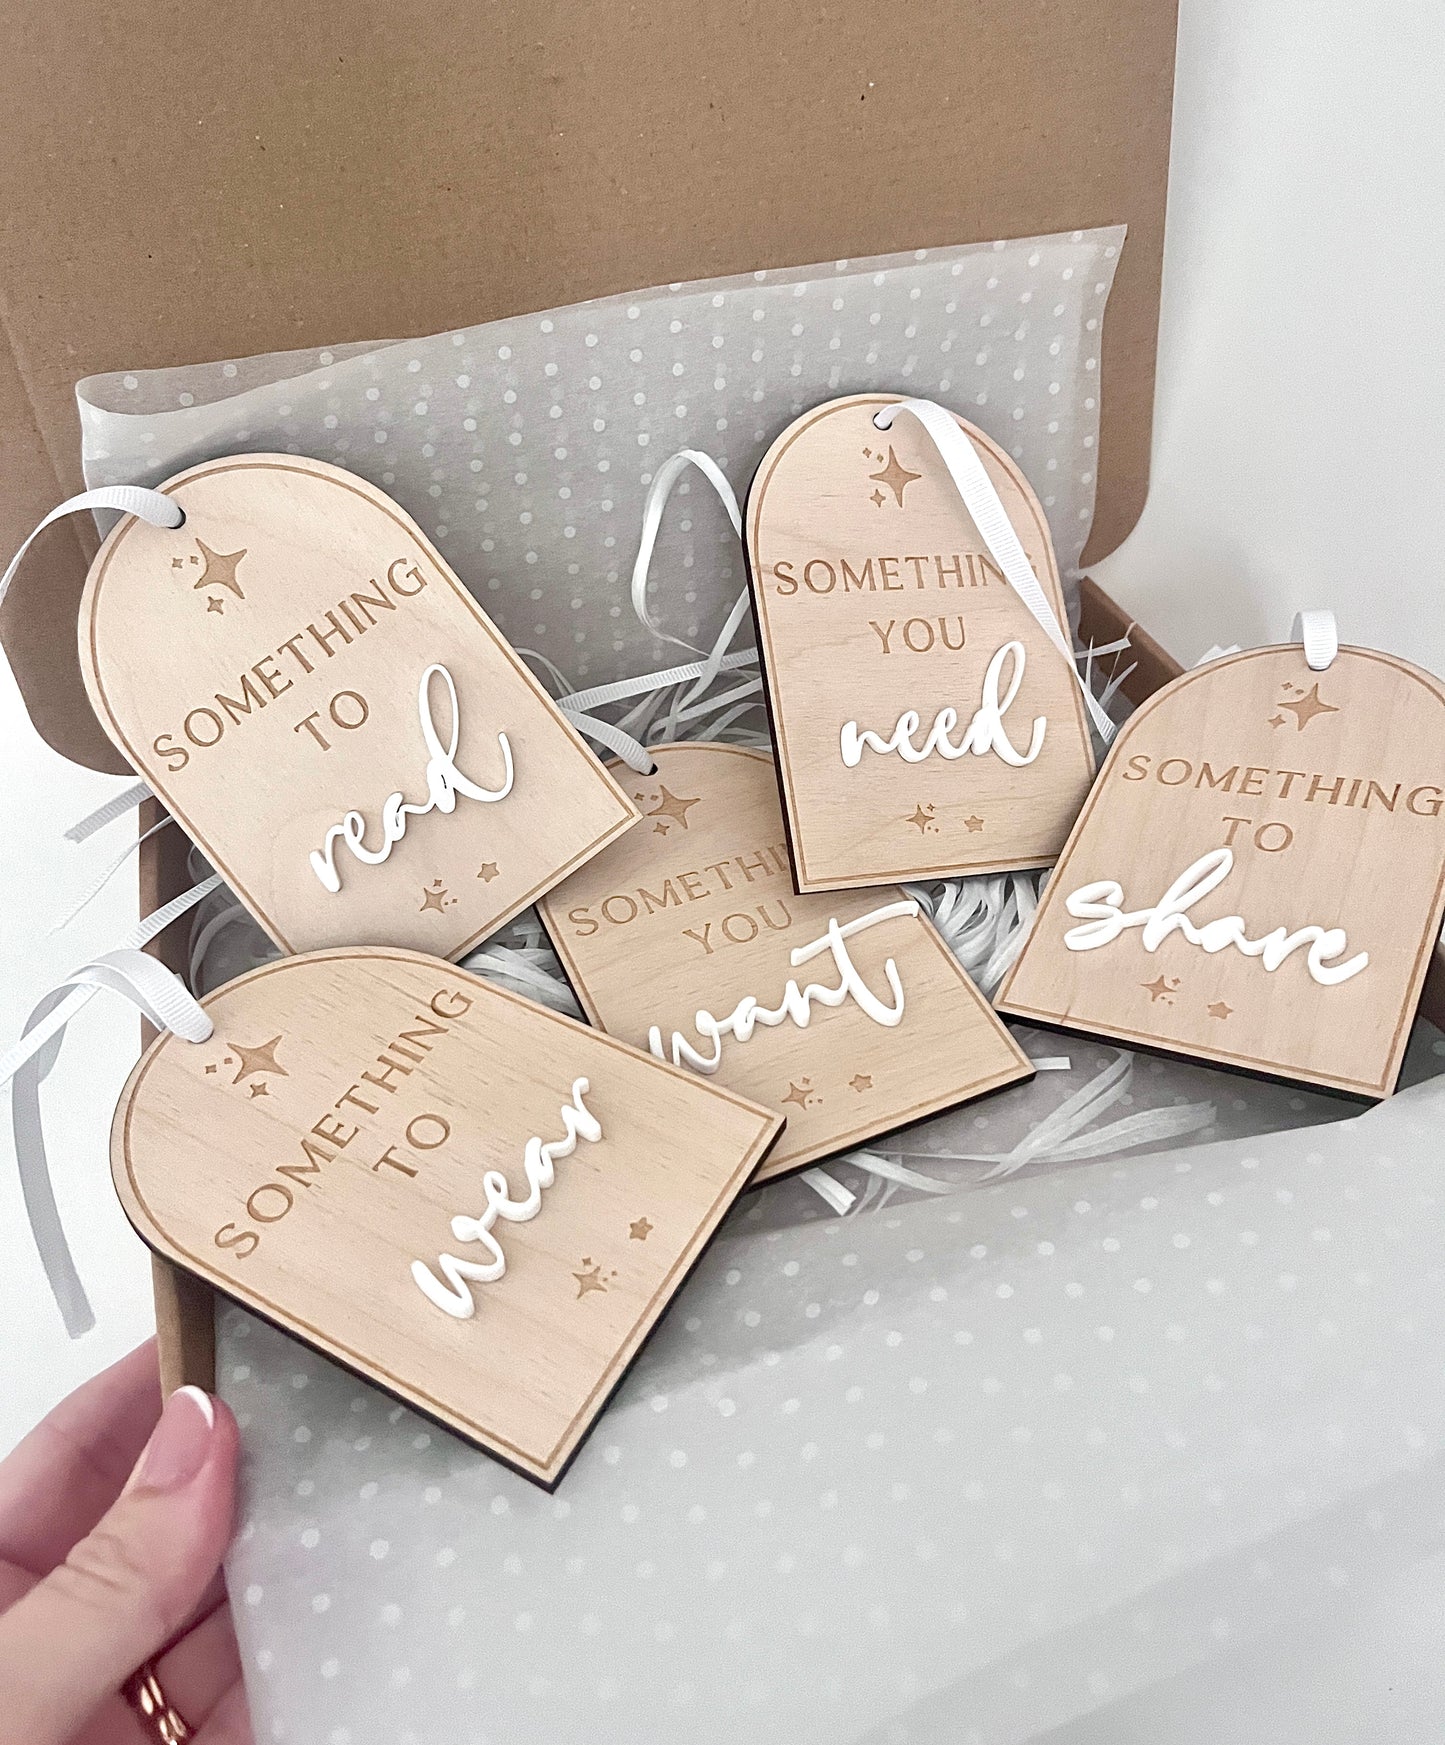 Mindful gift tags with white lettering